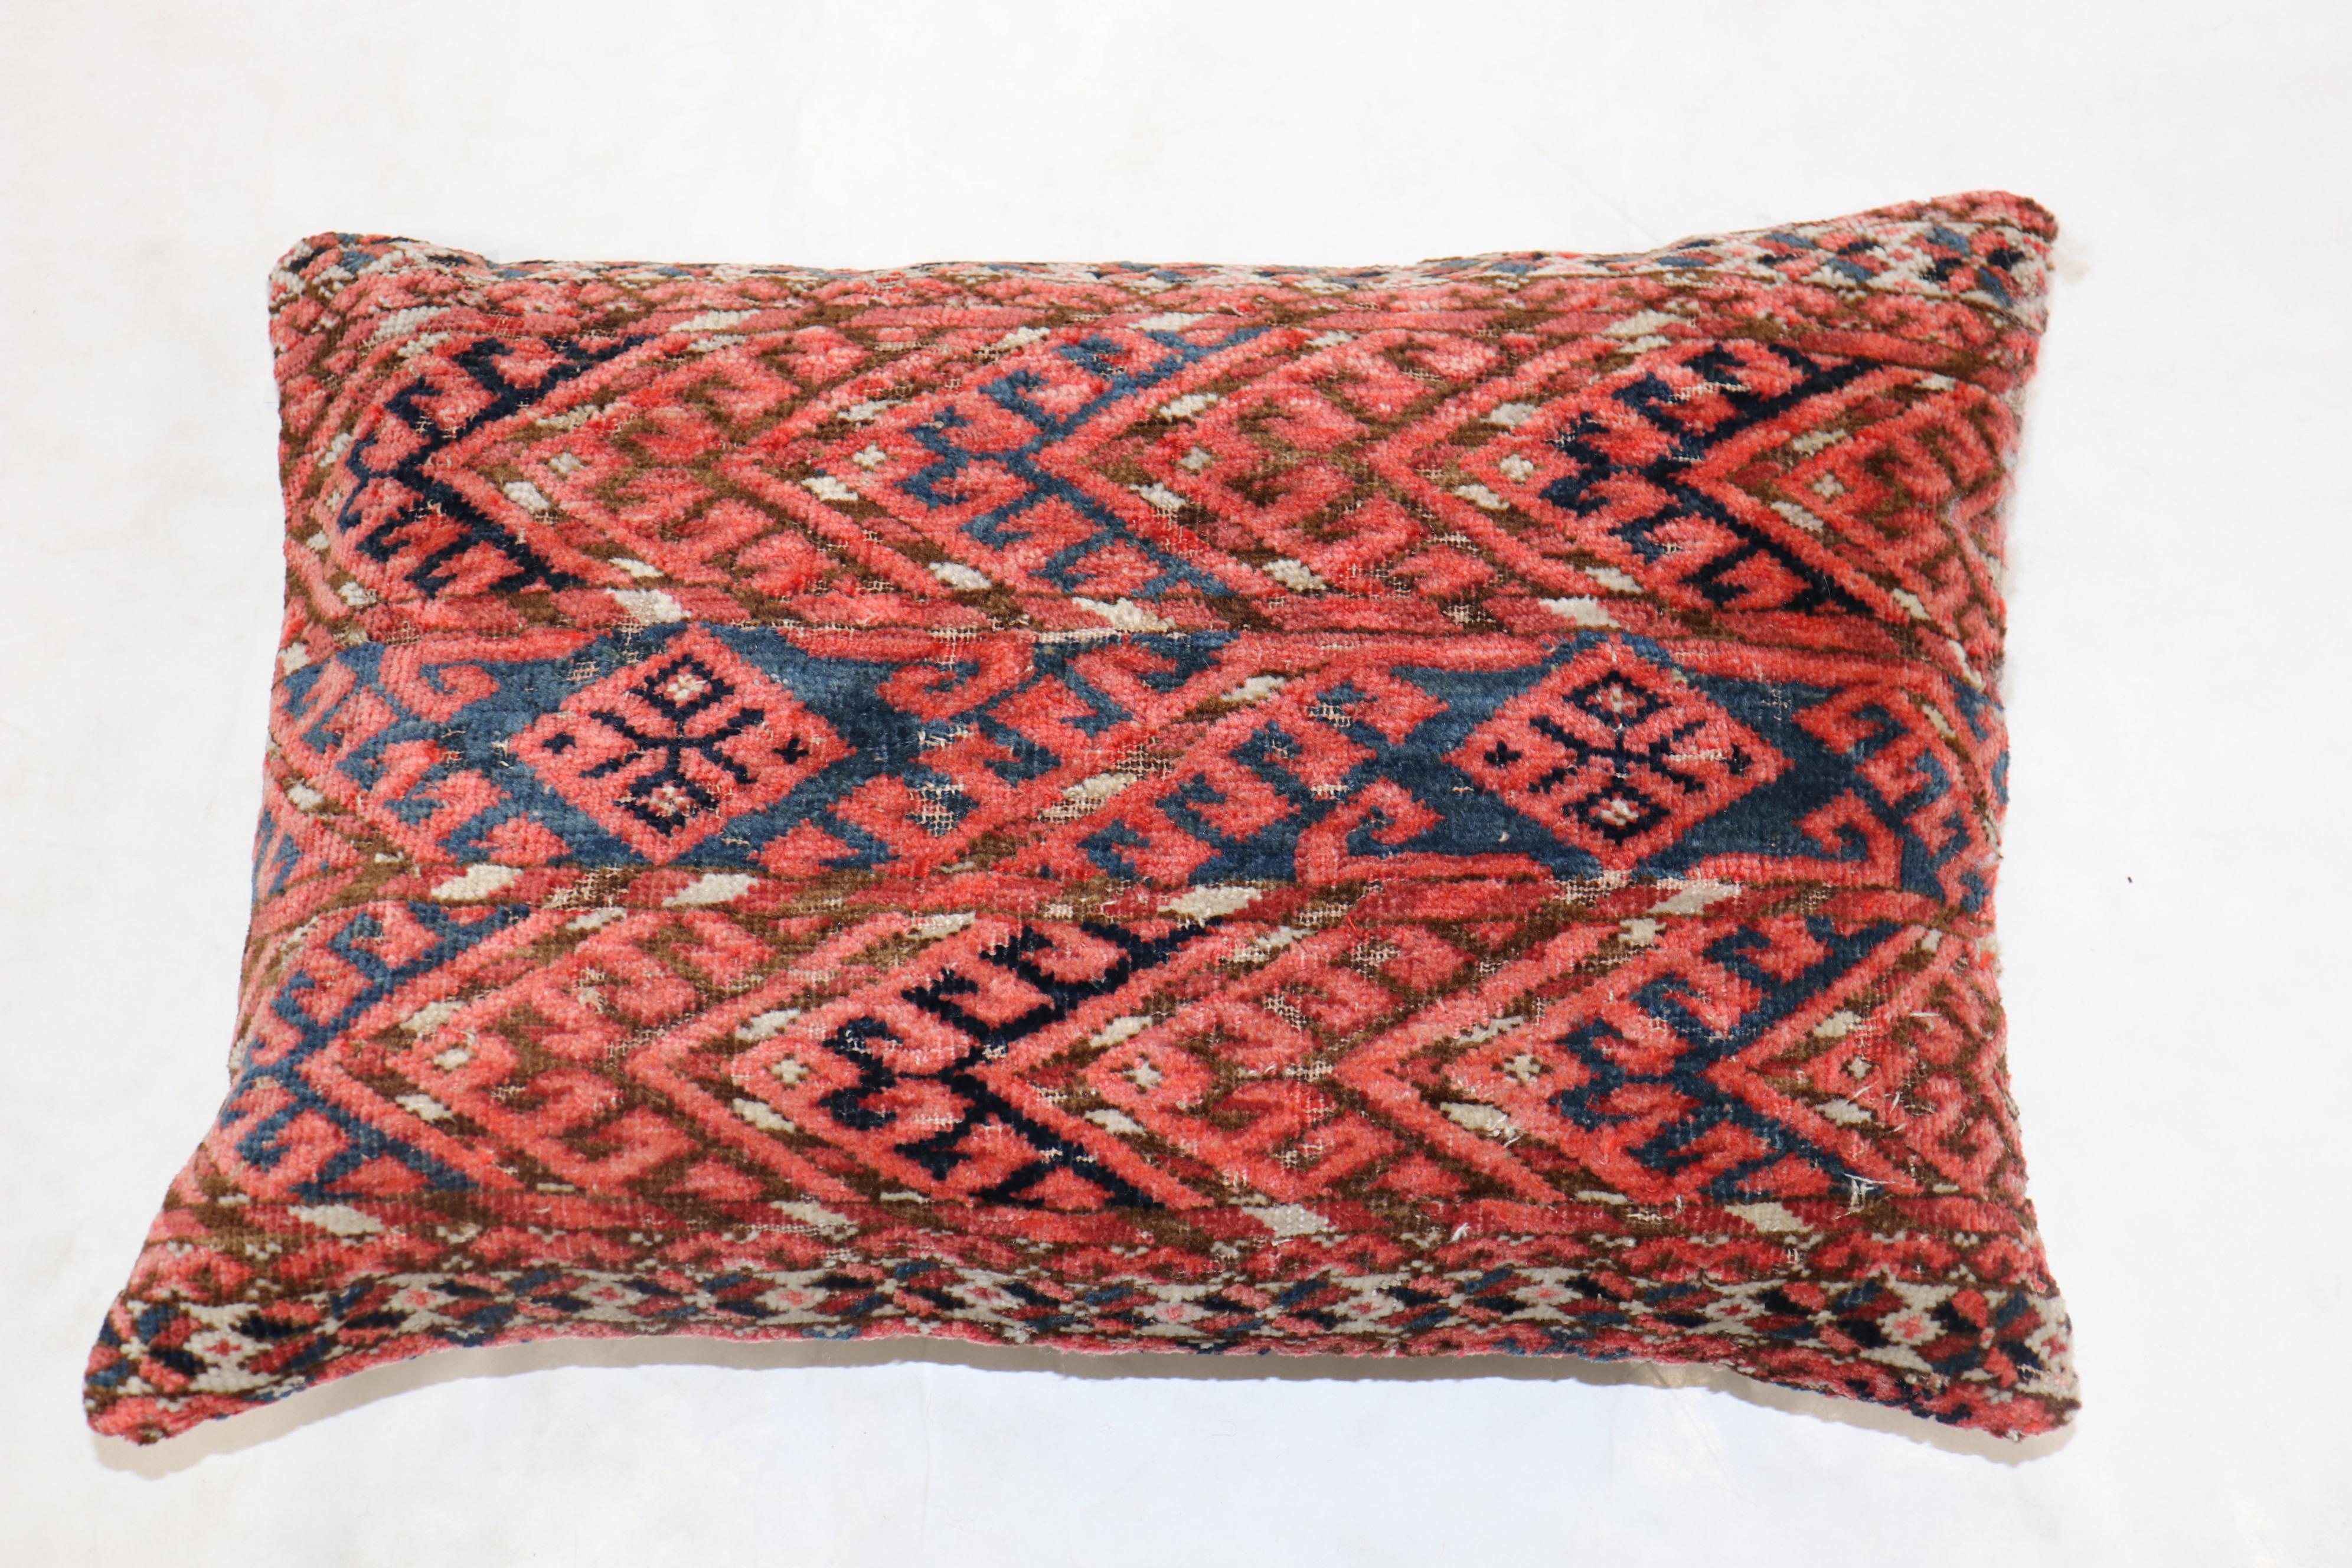 Pillow made from a 19th-century Tekke rug in a lumbar size.

Measures: 16